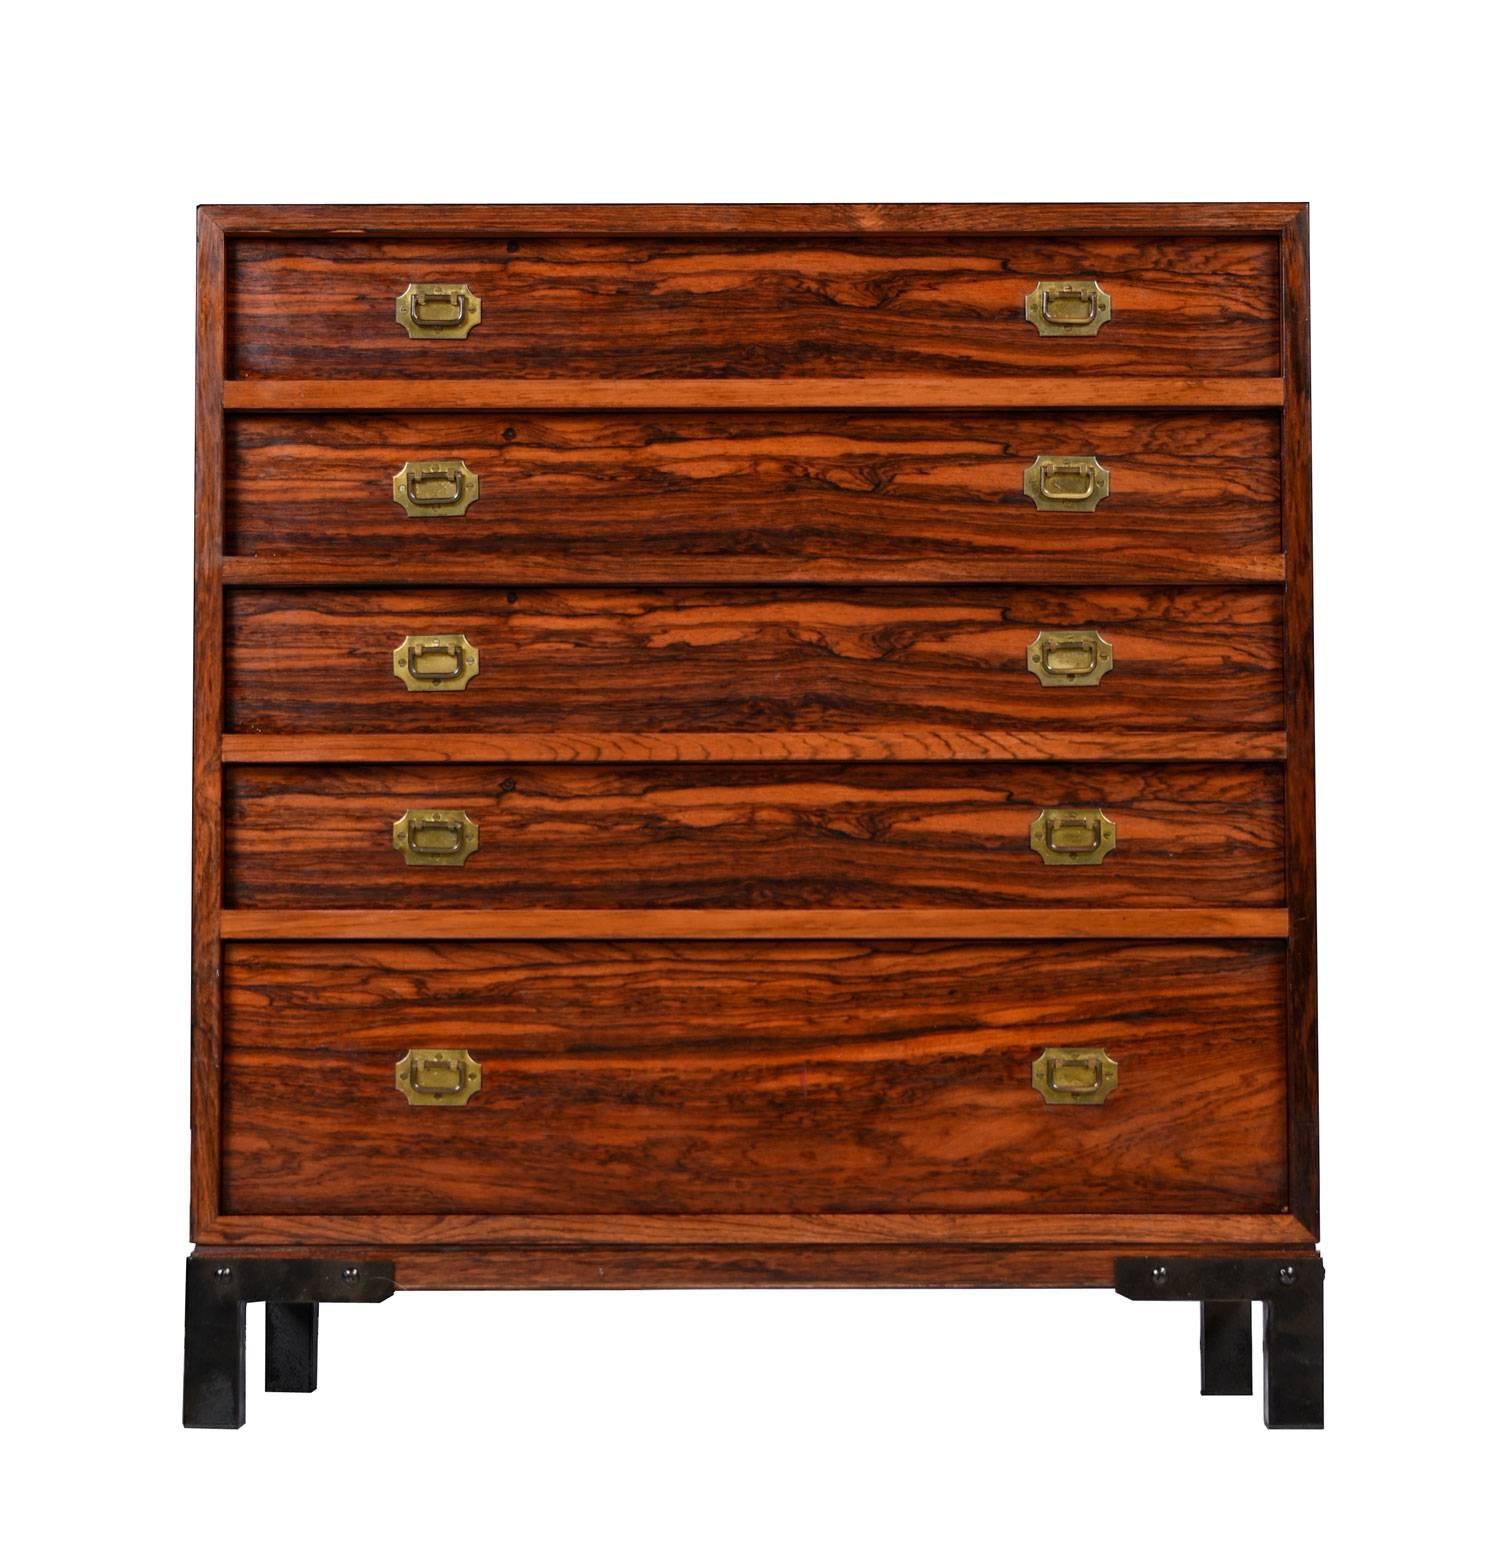 This unique, petite Asian modern chest is made of rosewood and accented with brass handles. The combination of the rich wood grain and detailed brass ornaments give this small coffer an elegant old world feel. Occidental meets Oriental. Perfect